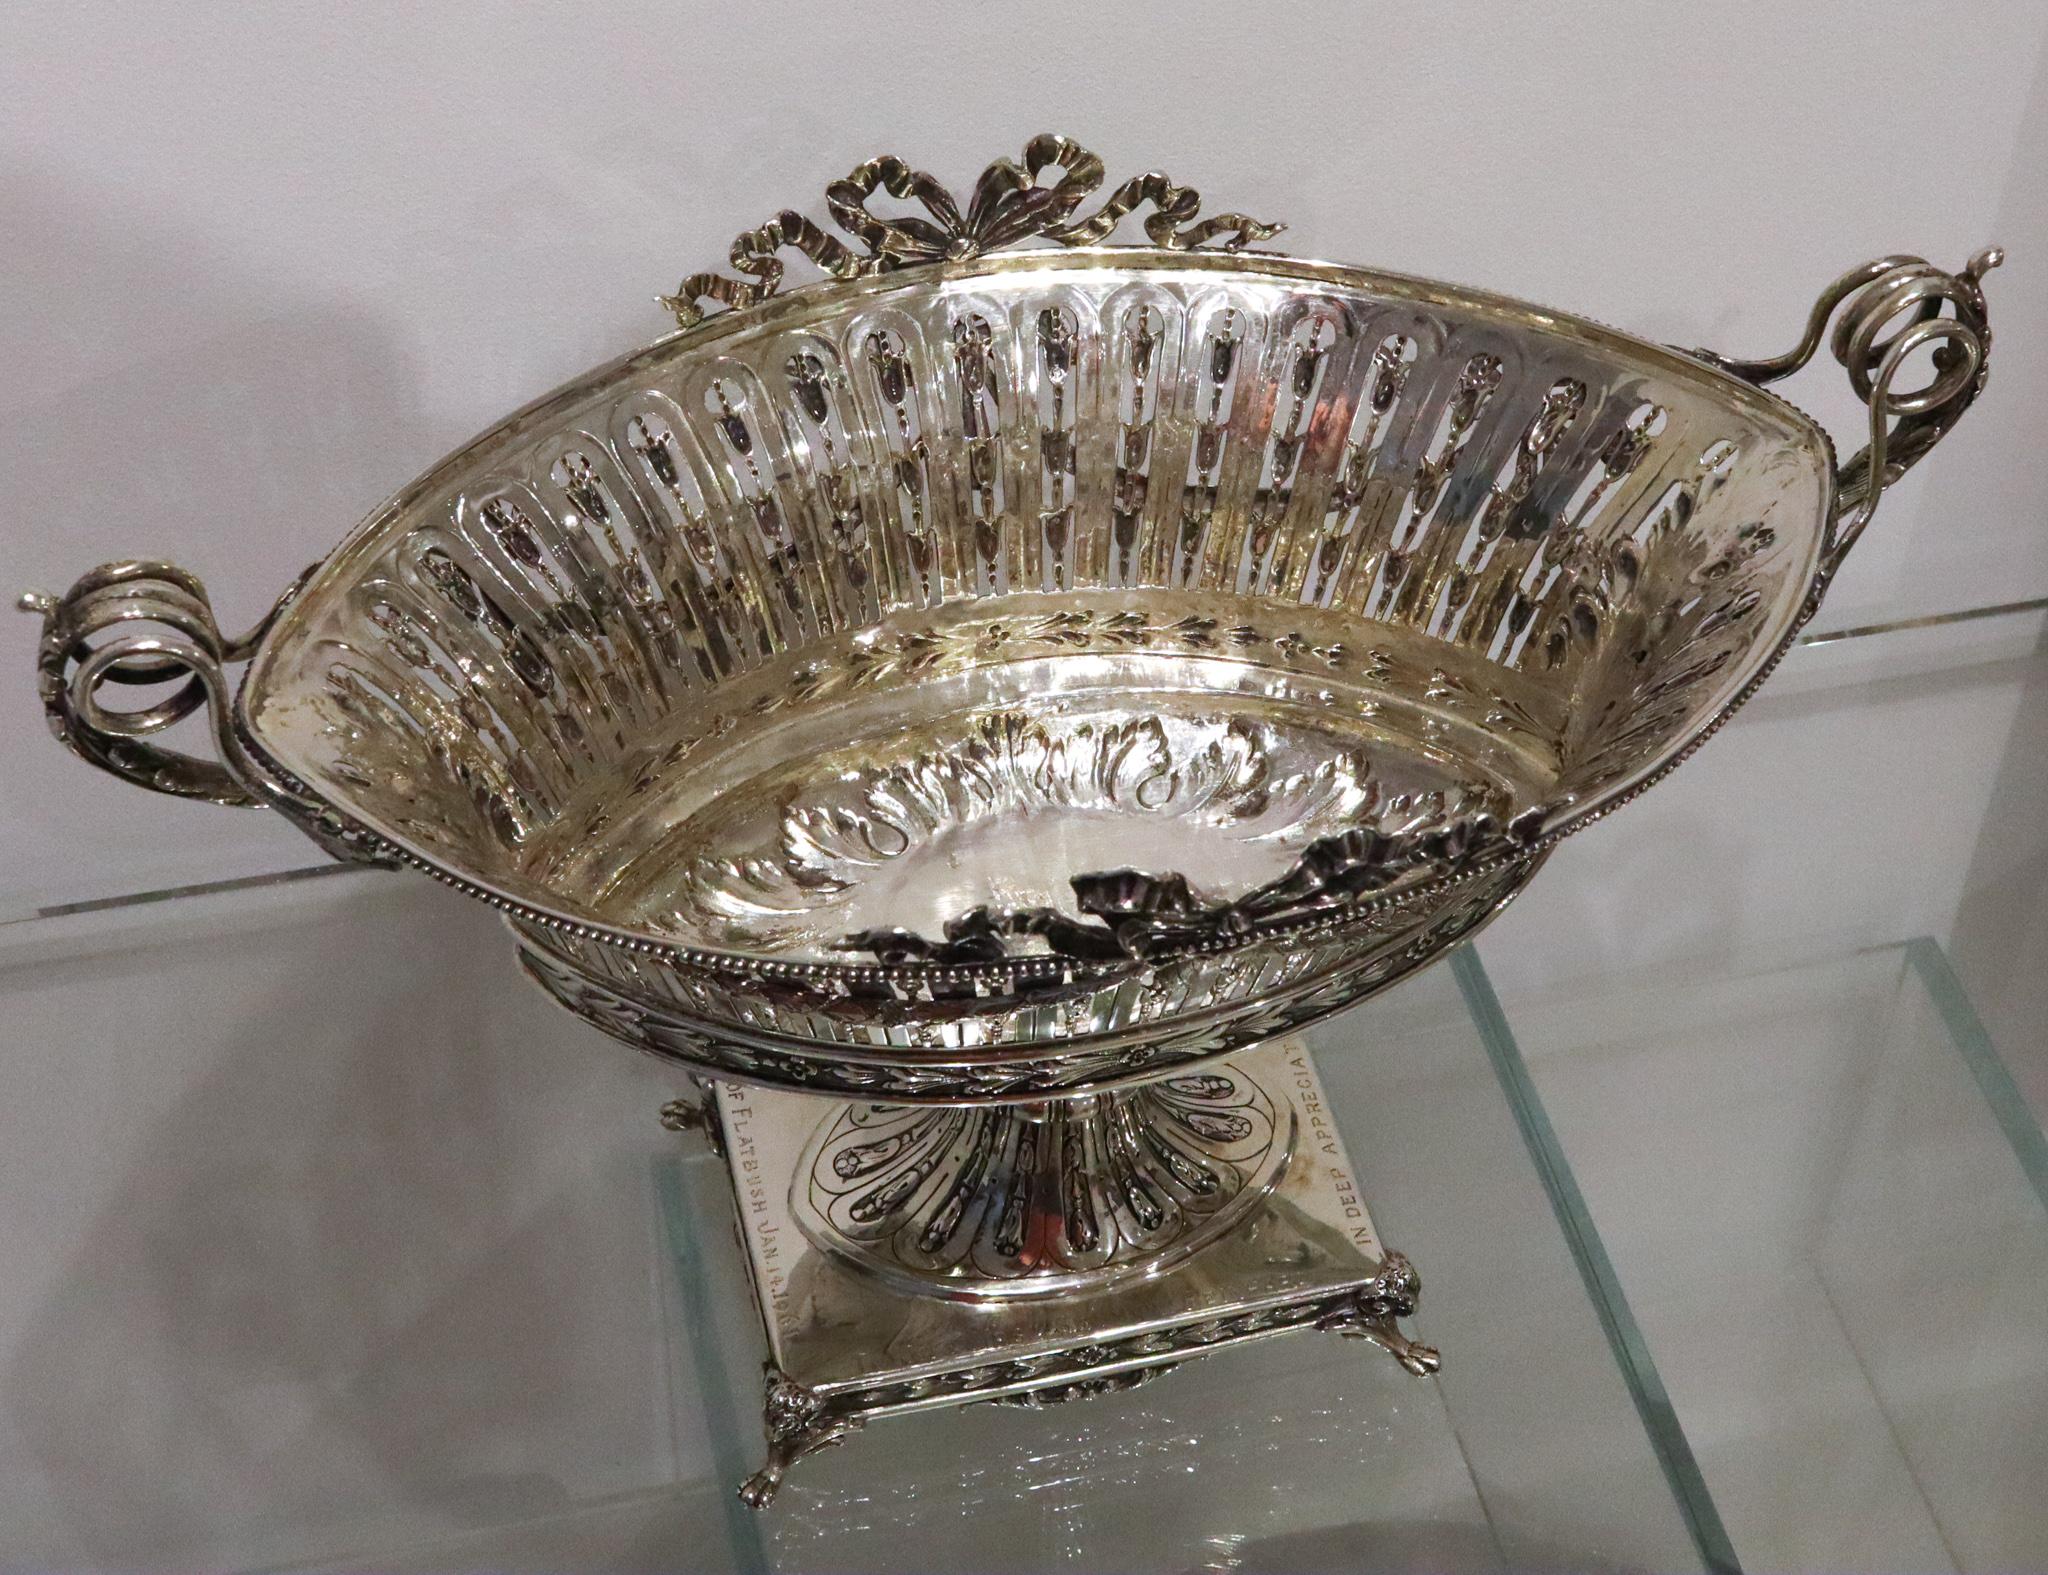 Weinranck & Schmidt Hanau German Empire 1889 Neoclassical Sterling Jardinière In Excellent Condition For Sale In Miami, FL